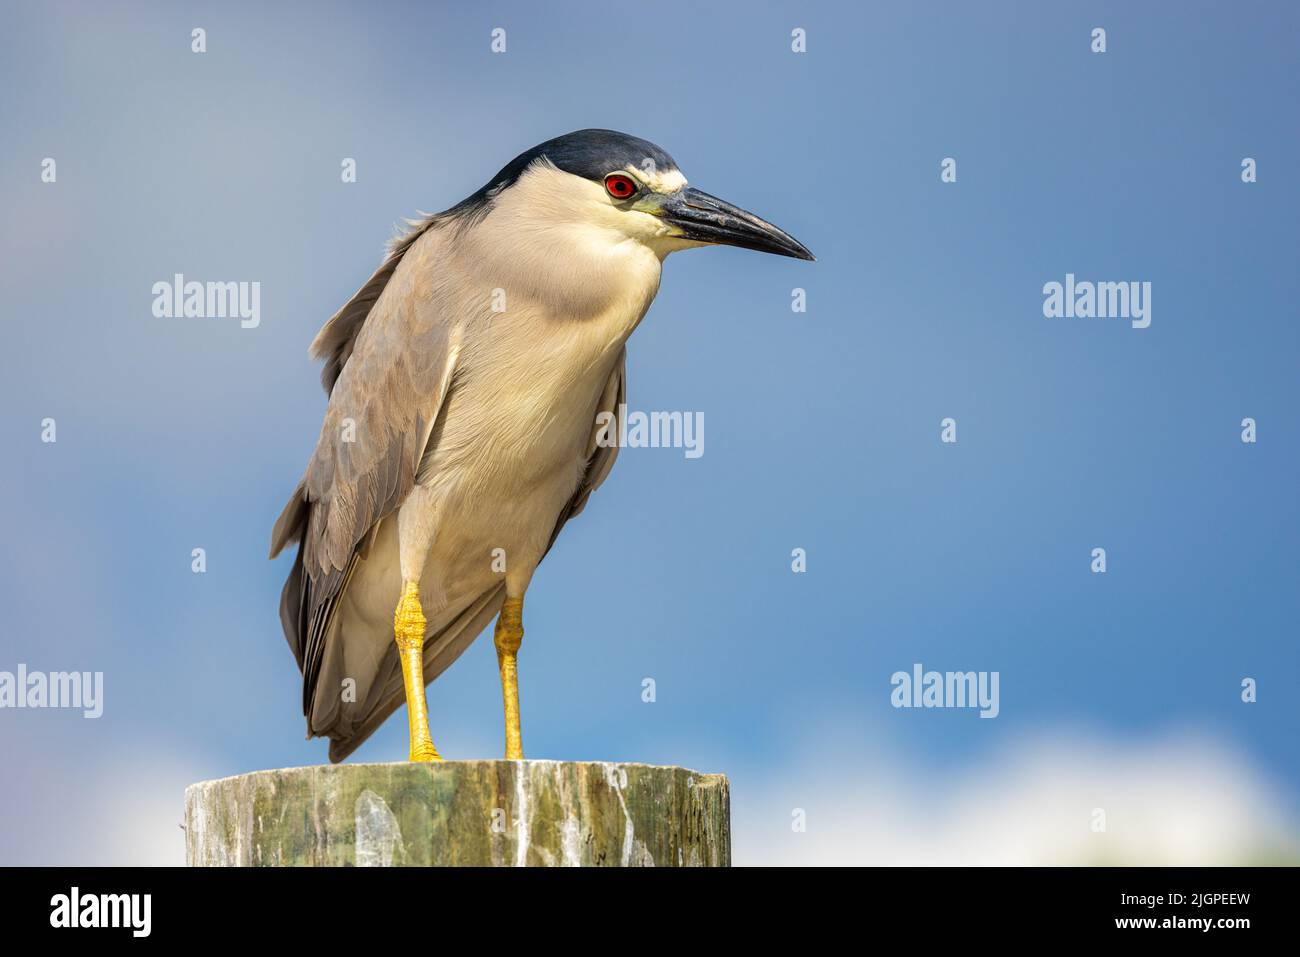 Black-crowned Night Heron (nycticorax nycticorax) perched on a dock piling against a blue sky. Stock Photo